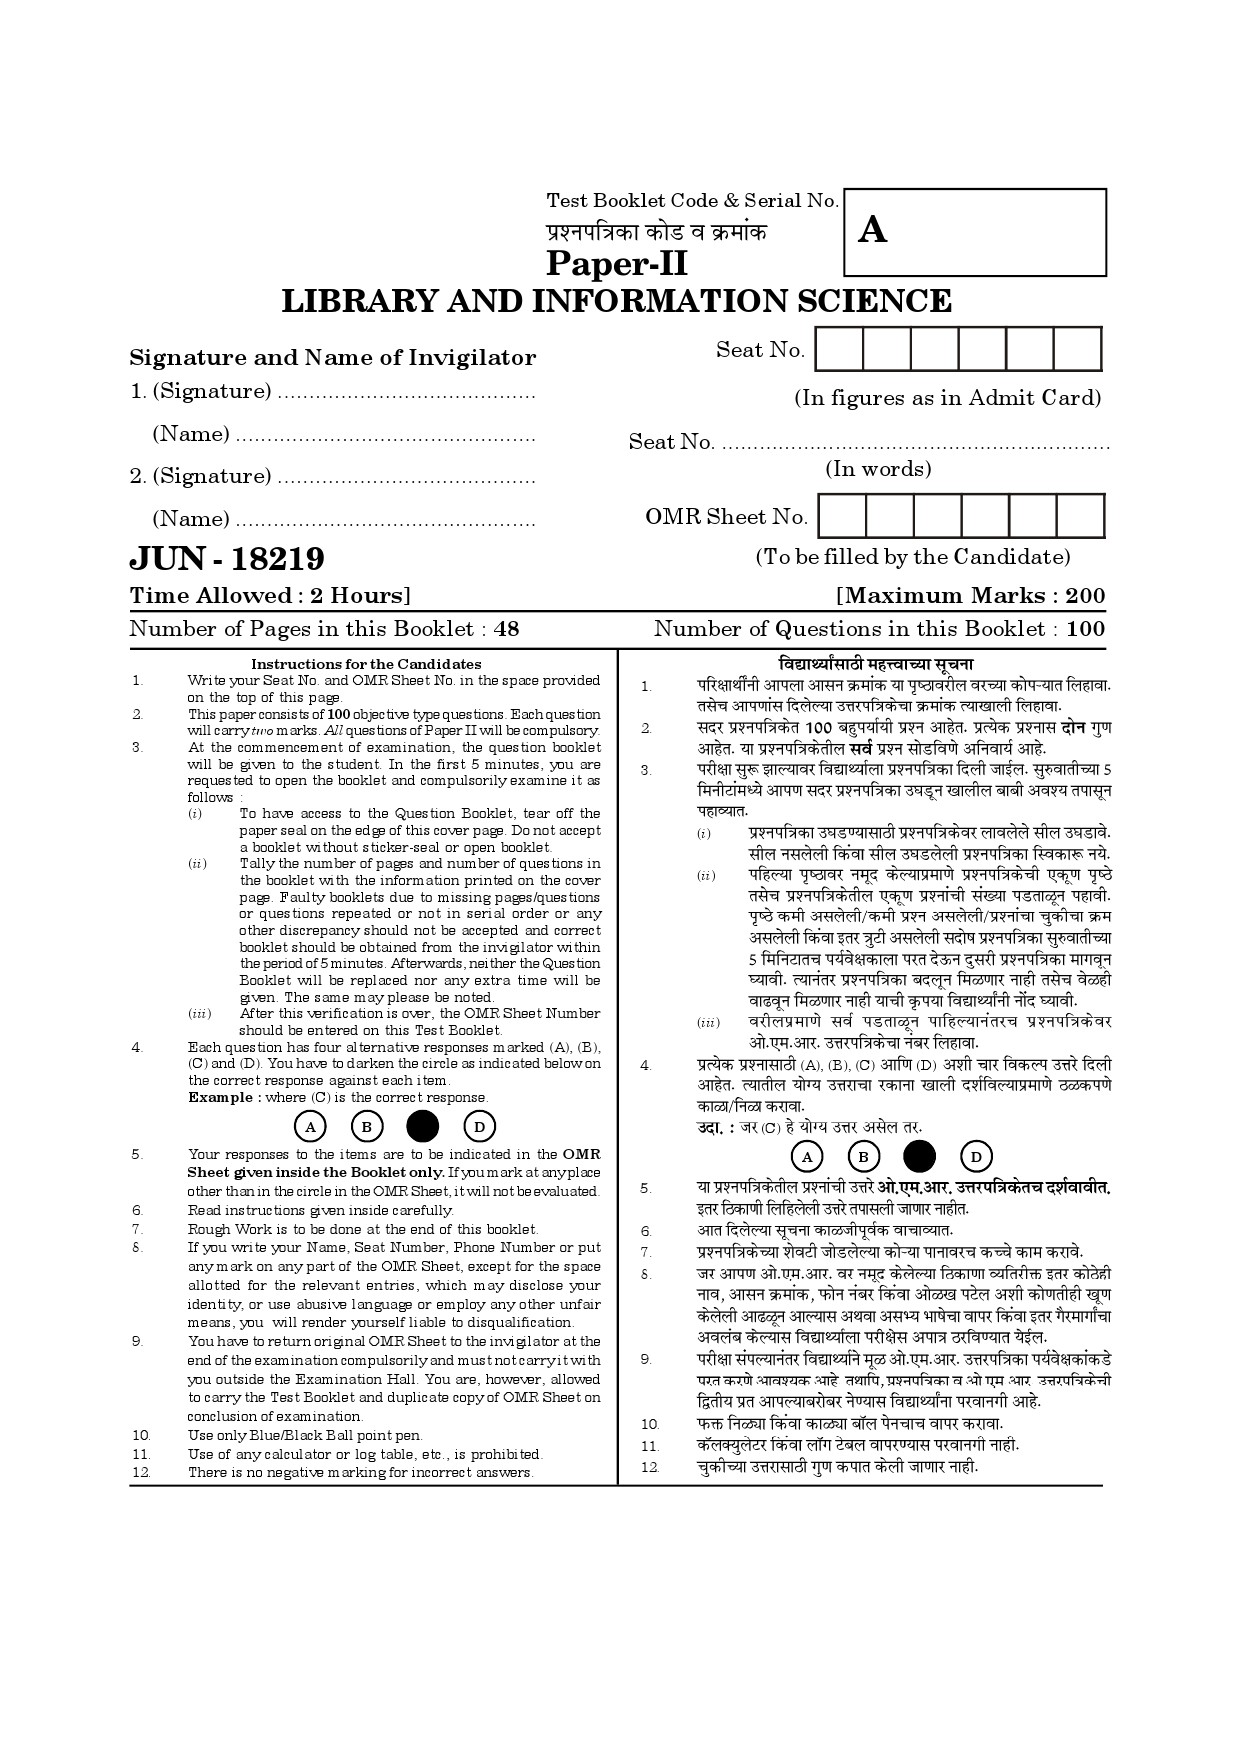 Maharashtra SET Library Information Science Question Paper II June 2019 1